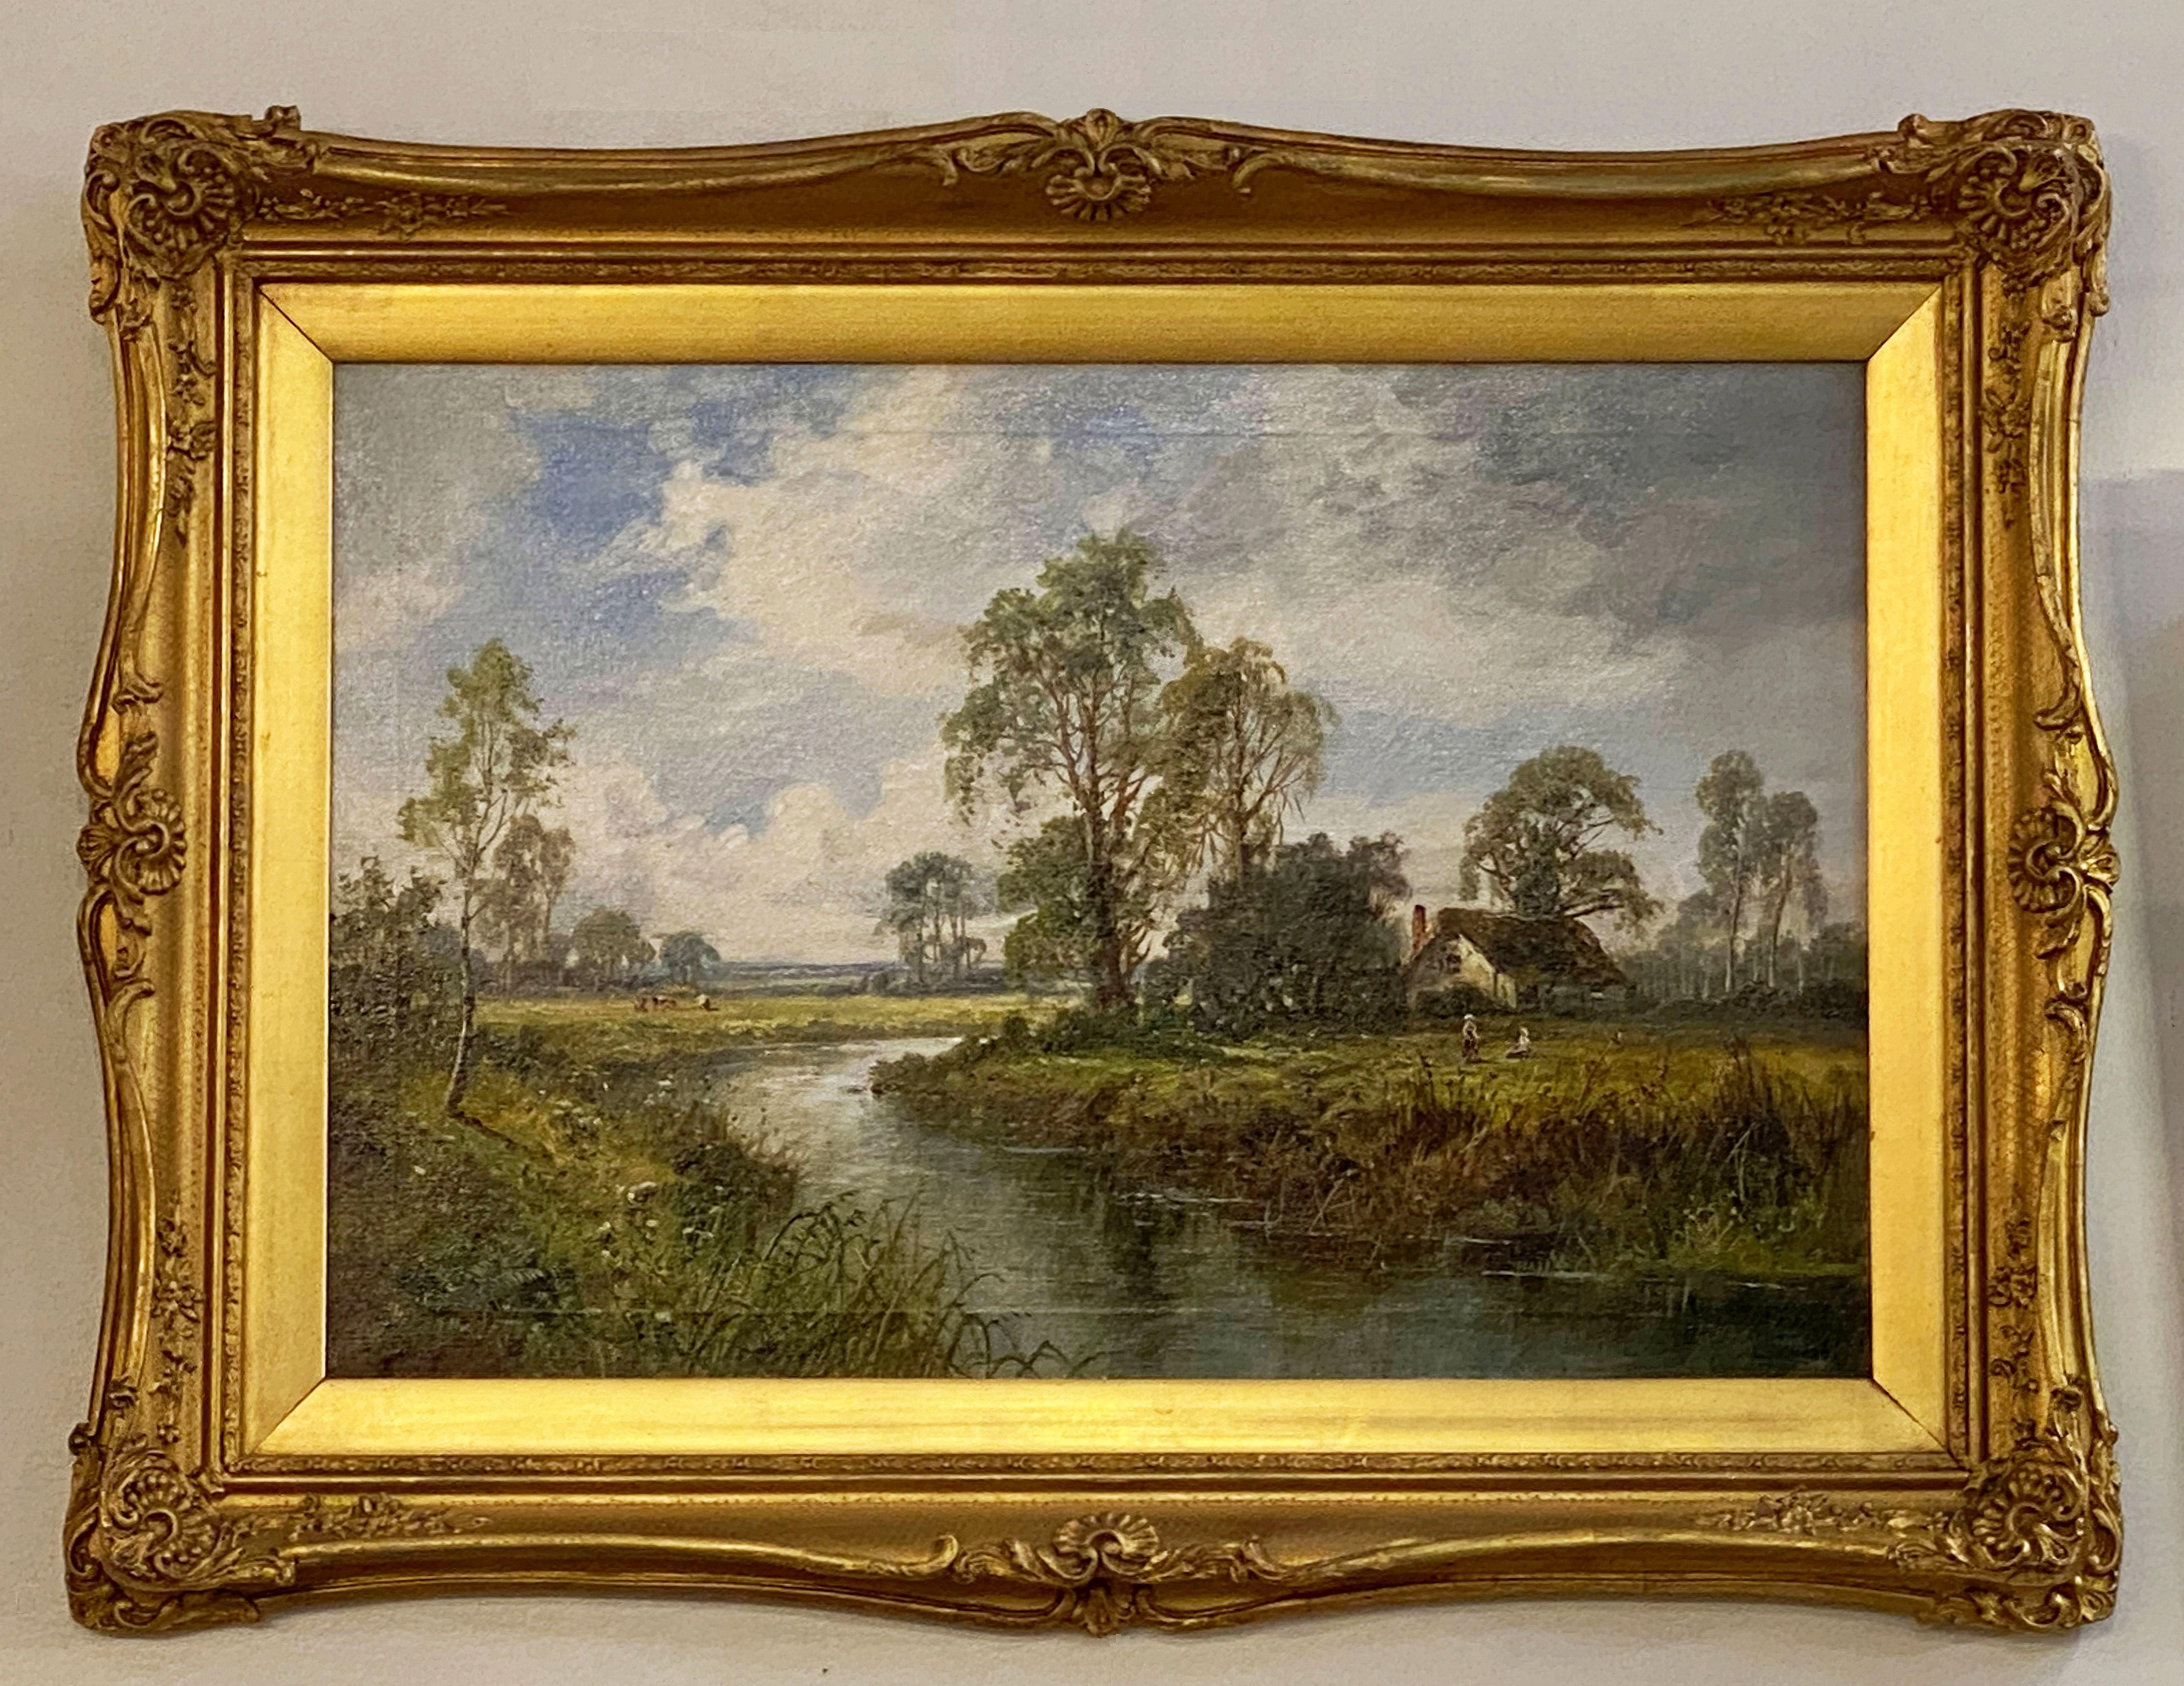 A fine rectangular English oil painting on canvas in a giltwood frame, featuring an English river landscape with cottage.

Signed: L. Richards

Dimensions: H 23 1/2 inches x W 31 inches x D 2 3/4 inches.